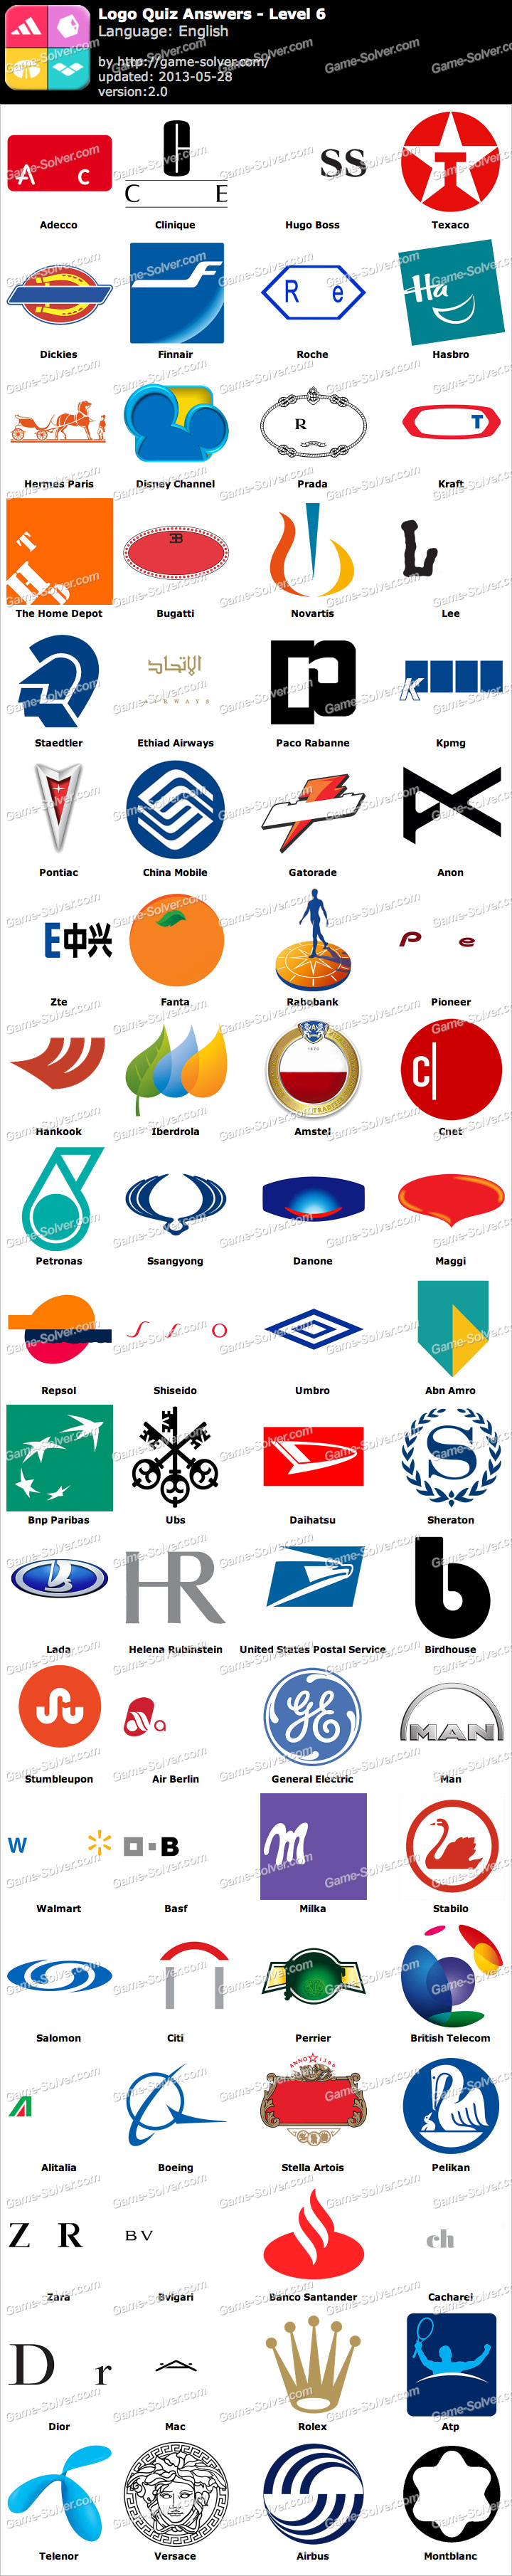 Top 6 logo quiz and answers